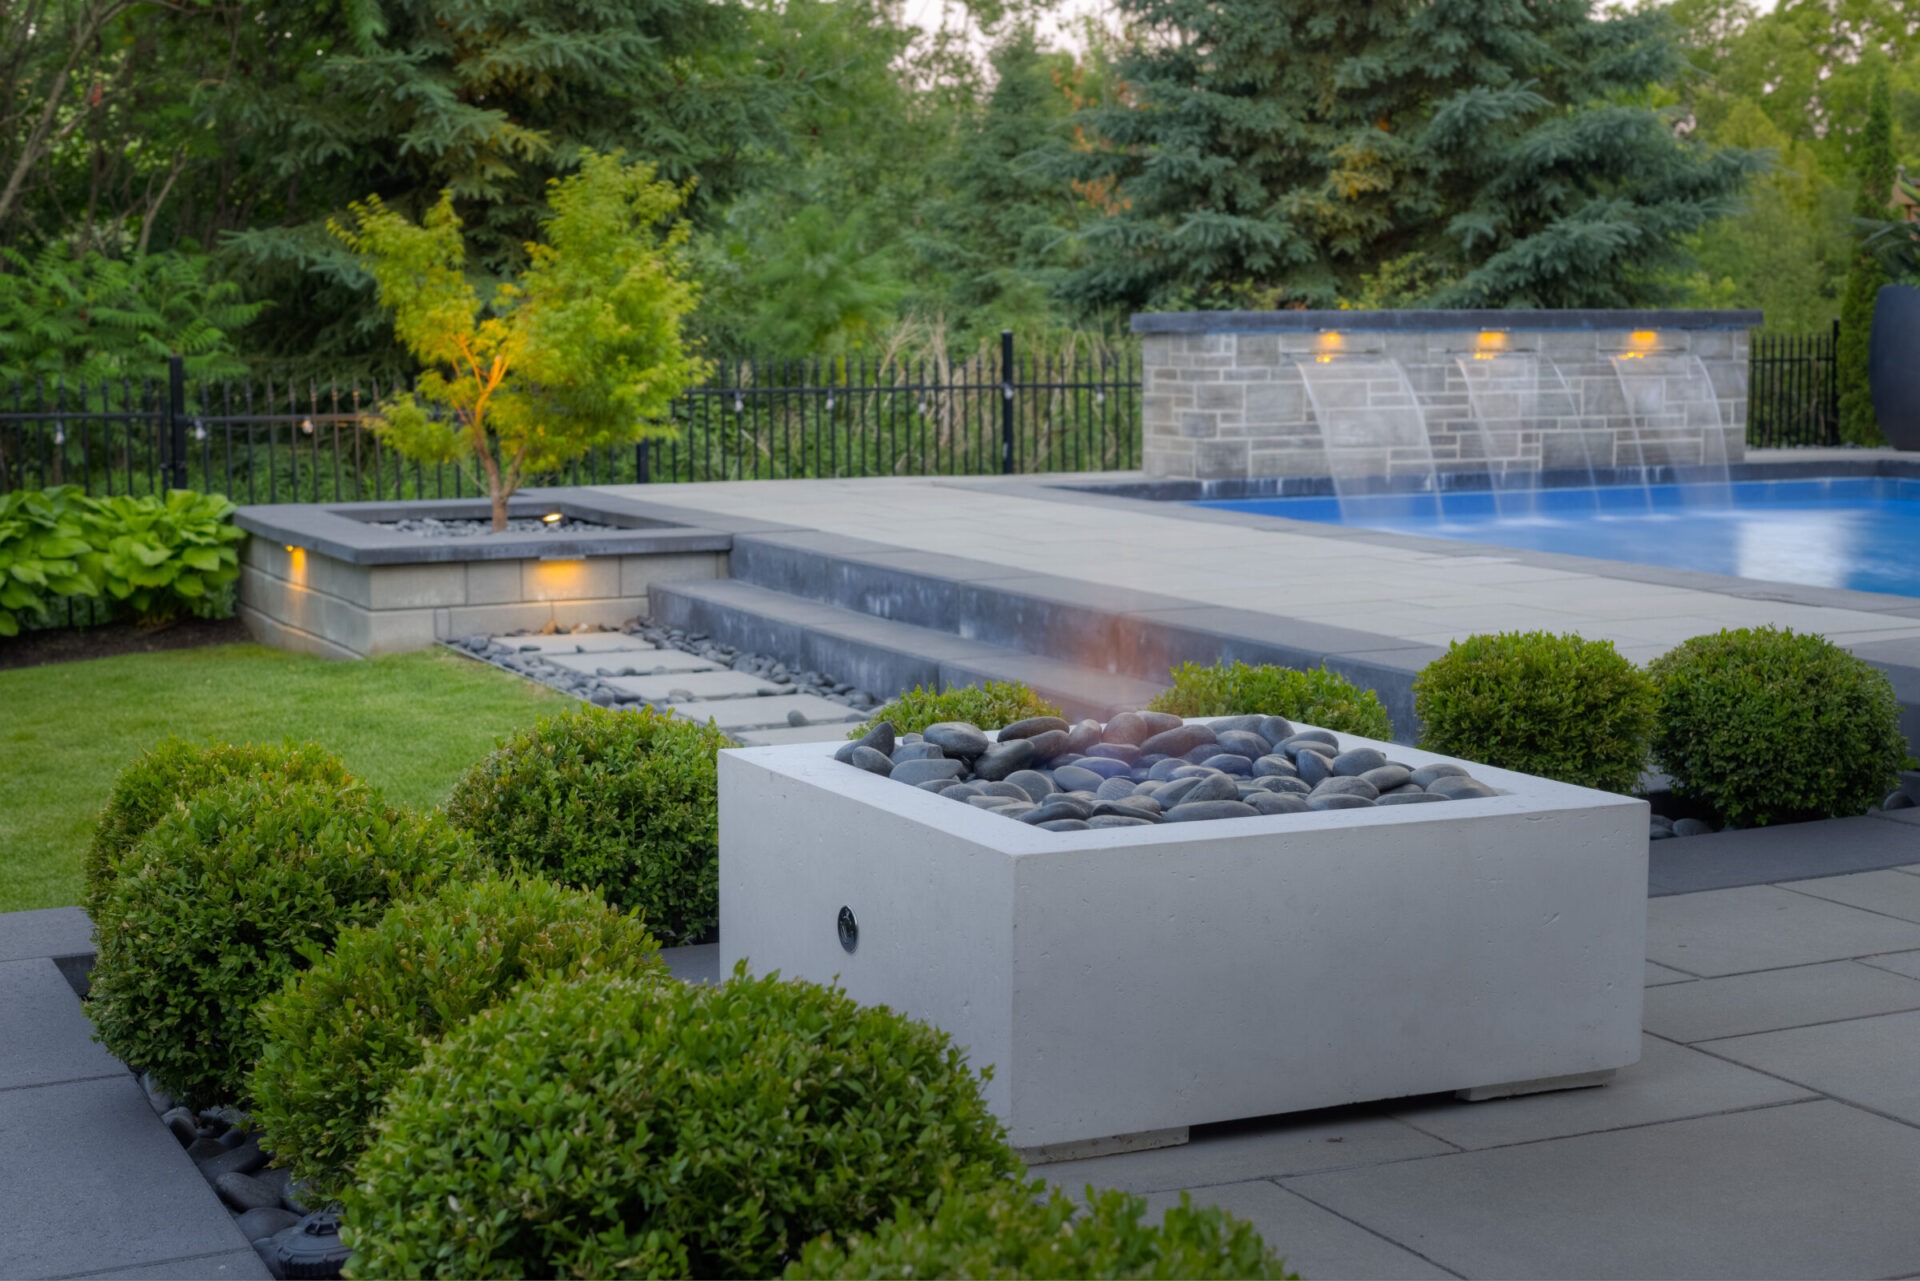 An outdoor area with a rectangular fire pit, neatly trimmed hedges, and a swimming pool with cascading water features in the background.